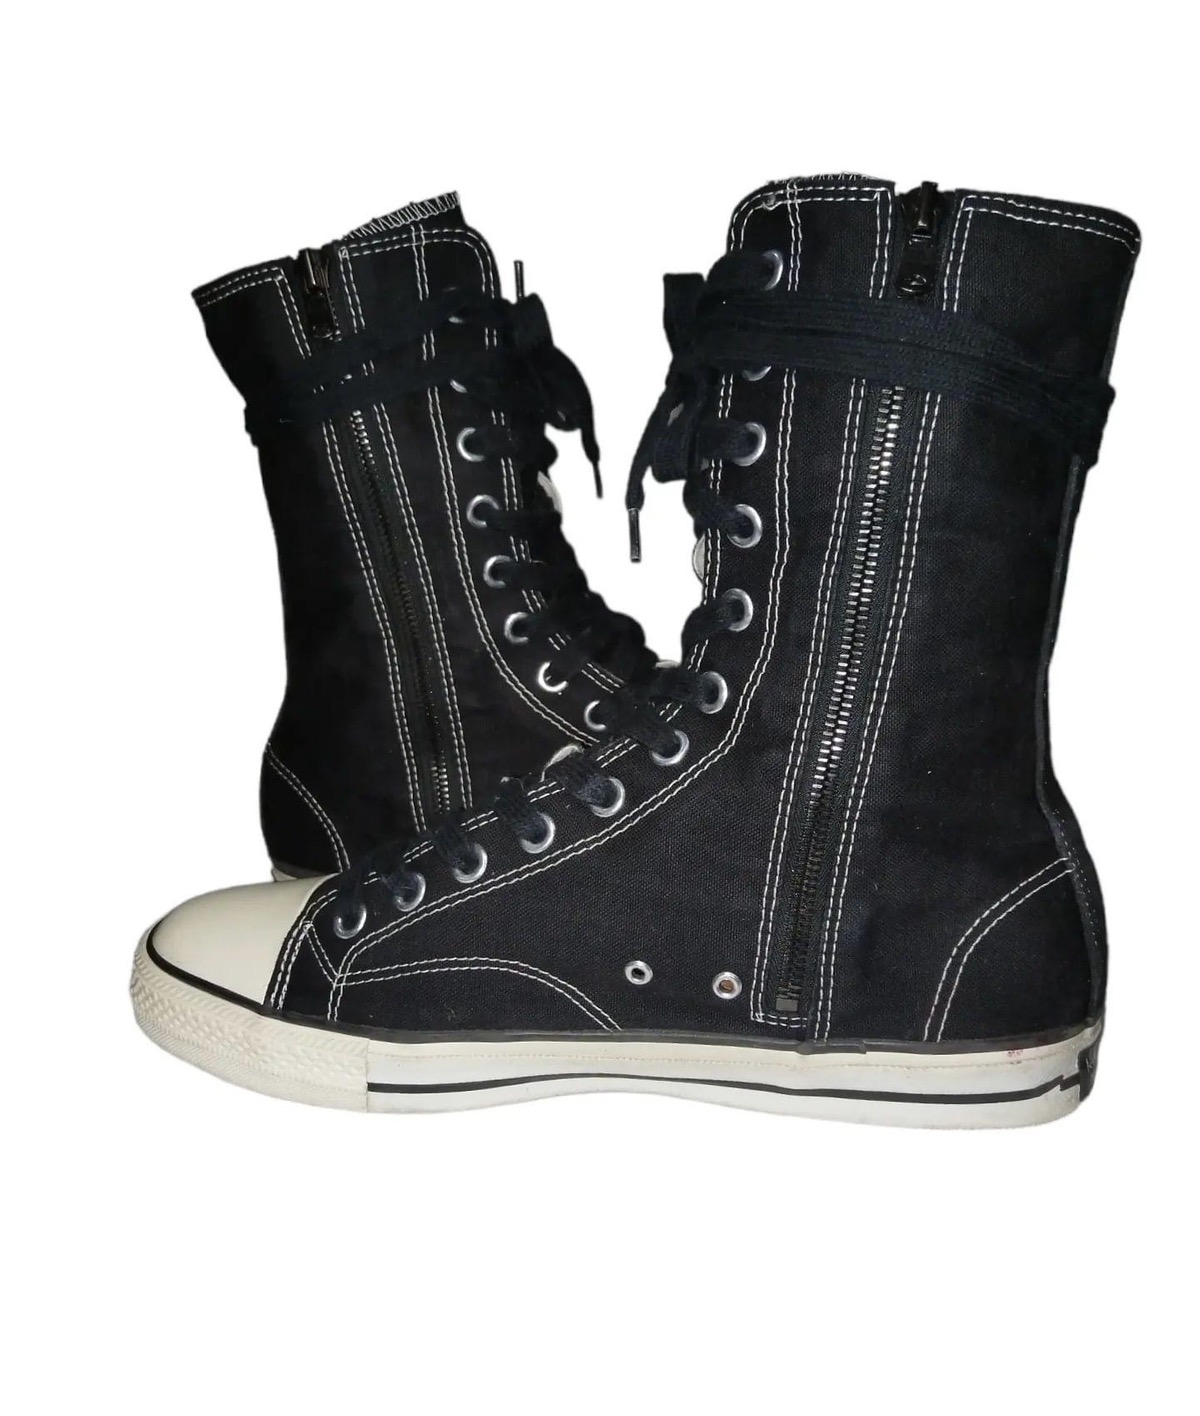 Numbernine higher high top shoes - 1